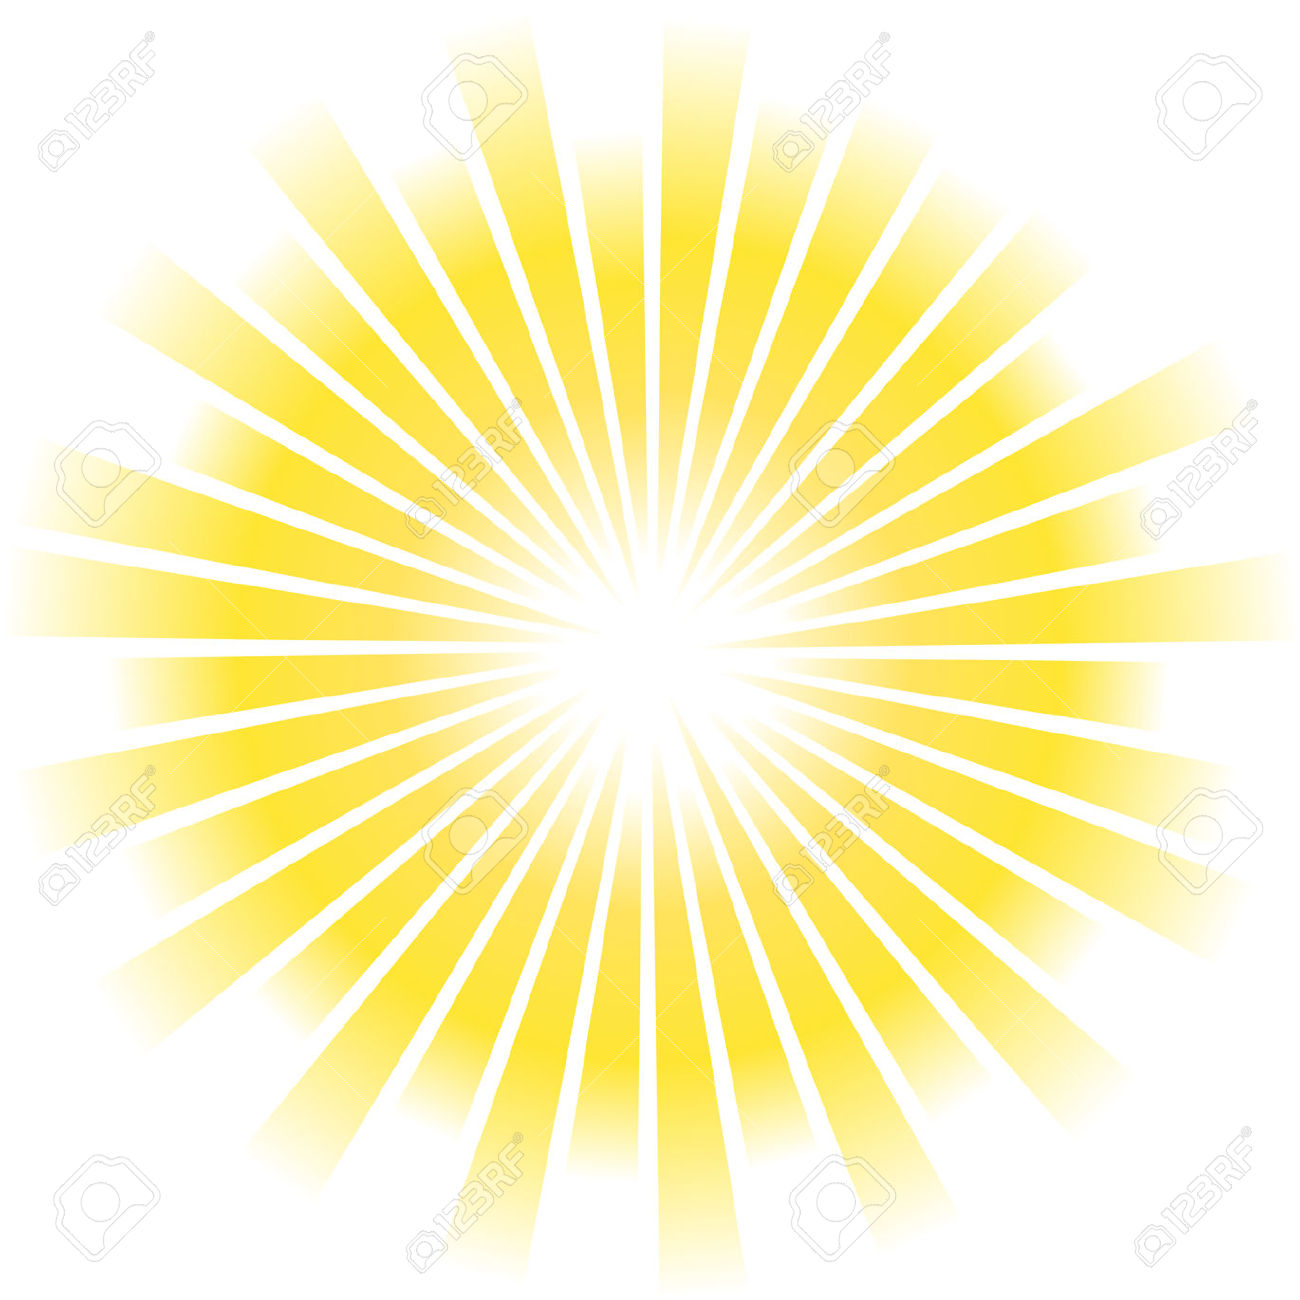 Sun Pic Rays Sunlight Ray HD Image Free PNG Clipart